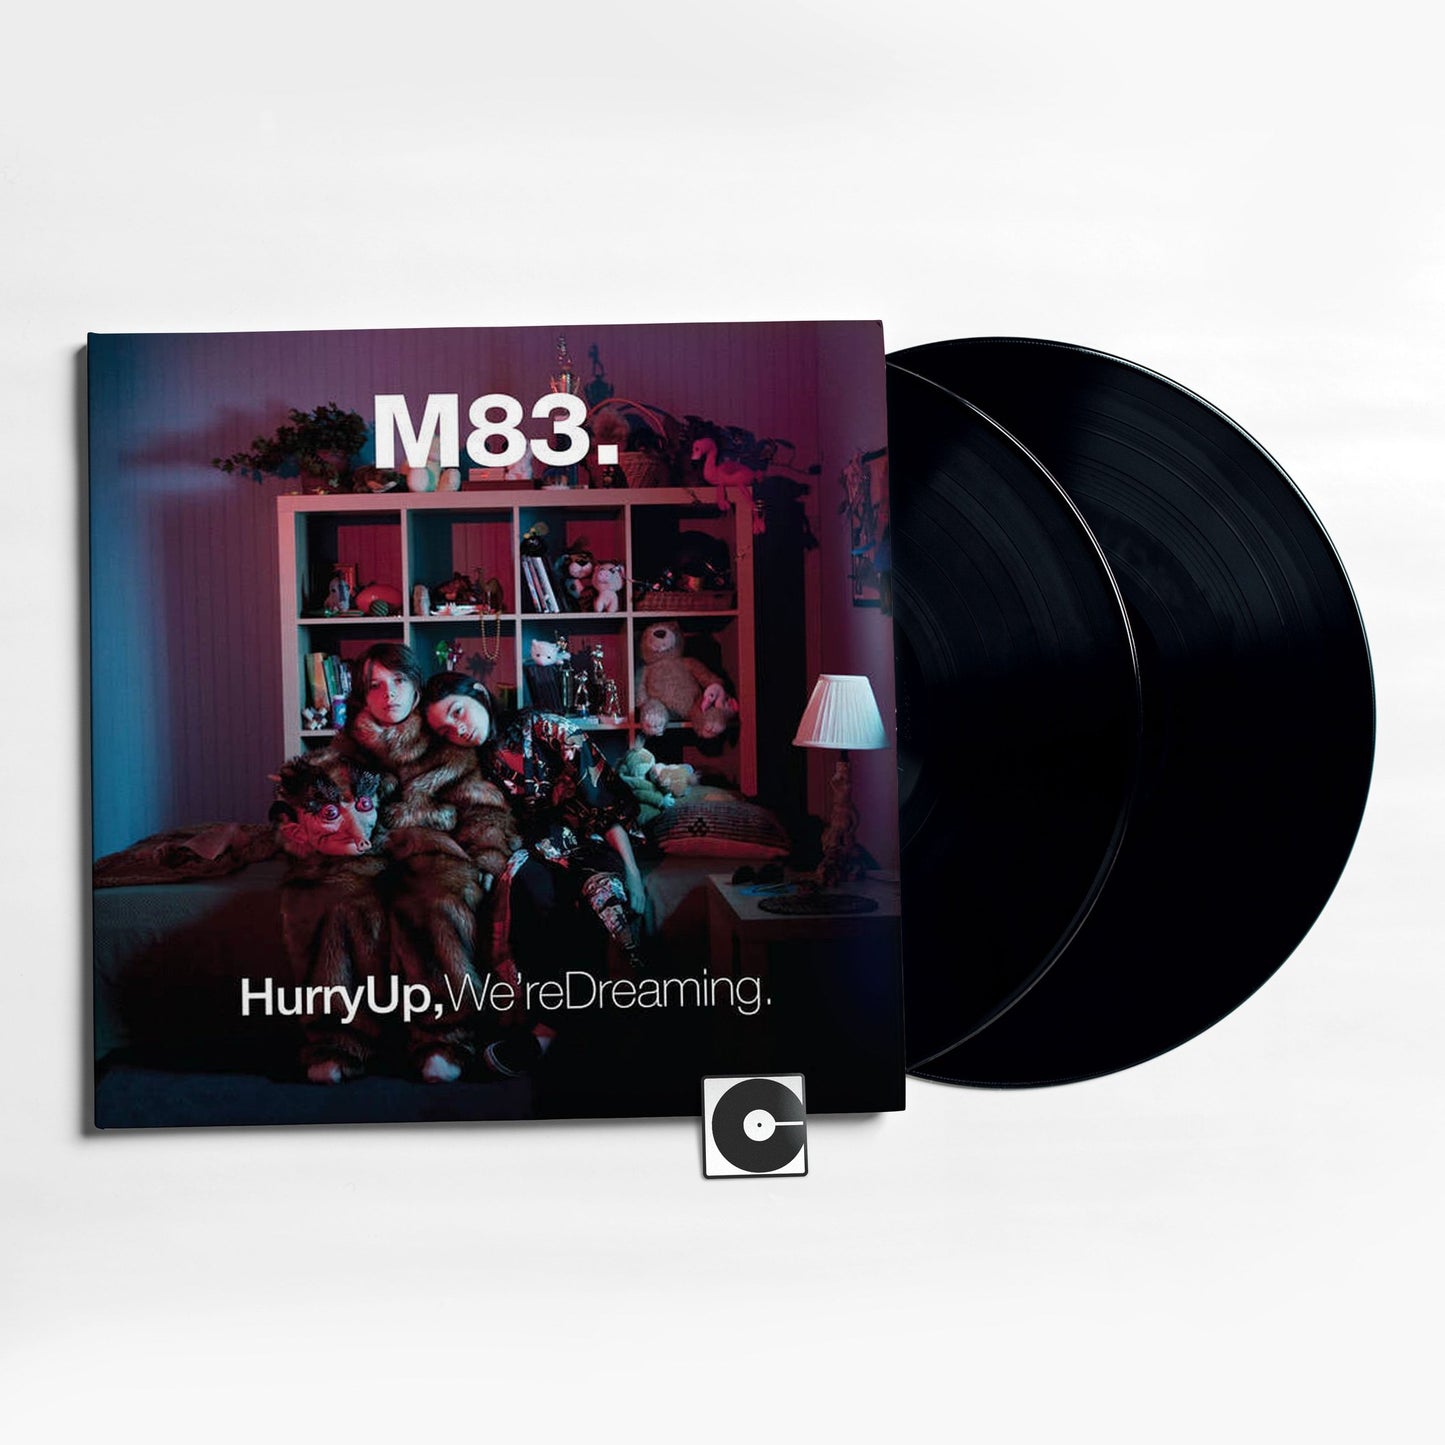 M83 - "Hurry Up, We're Dreaming"